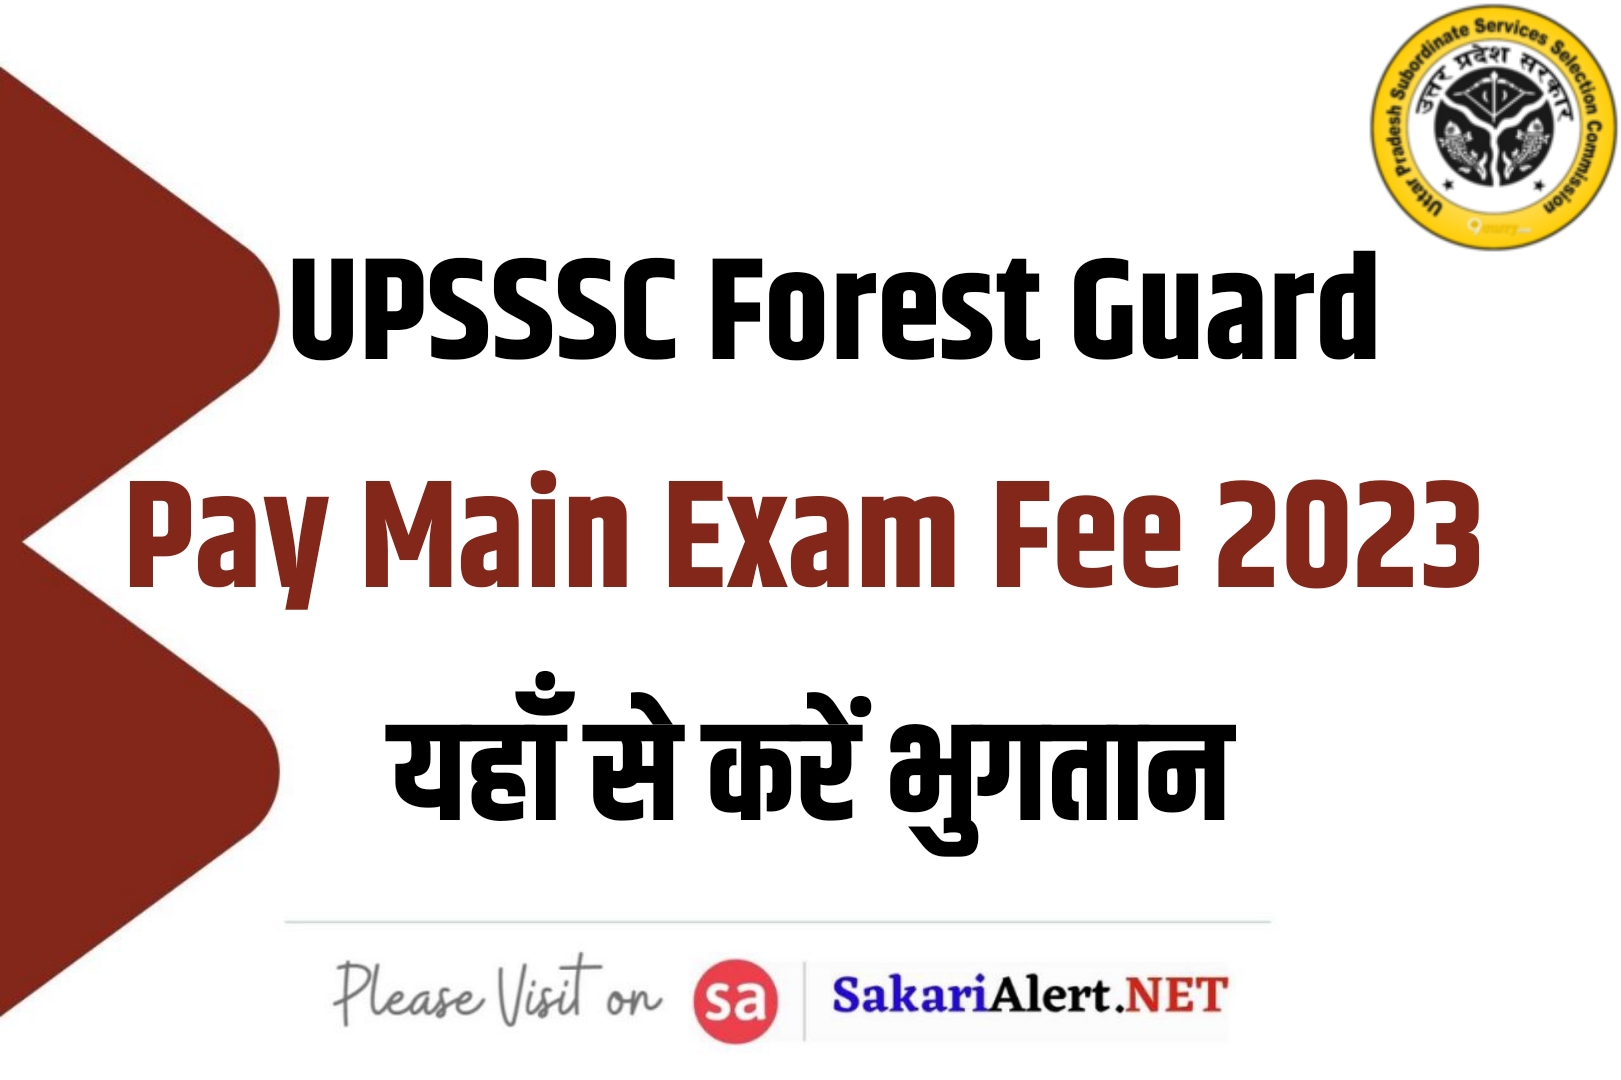 UPSSSC Forest Guard Pay Main Exam Fee 2023